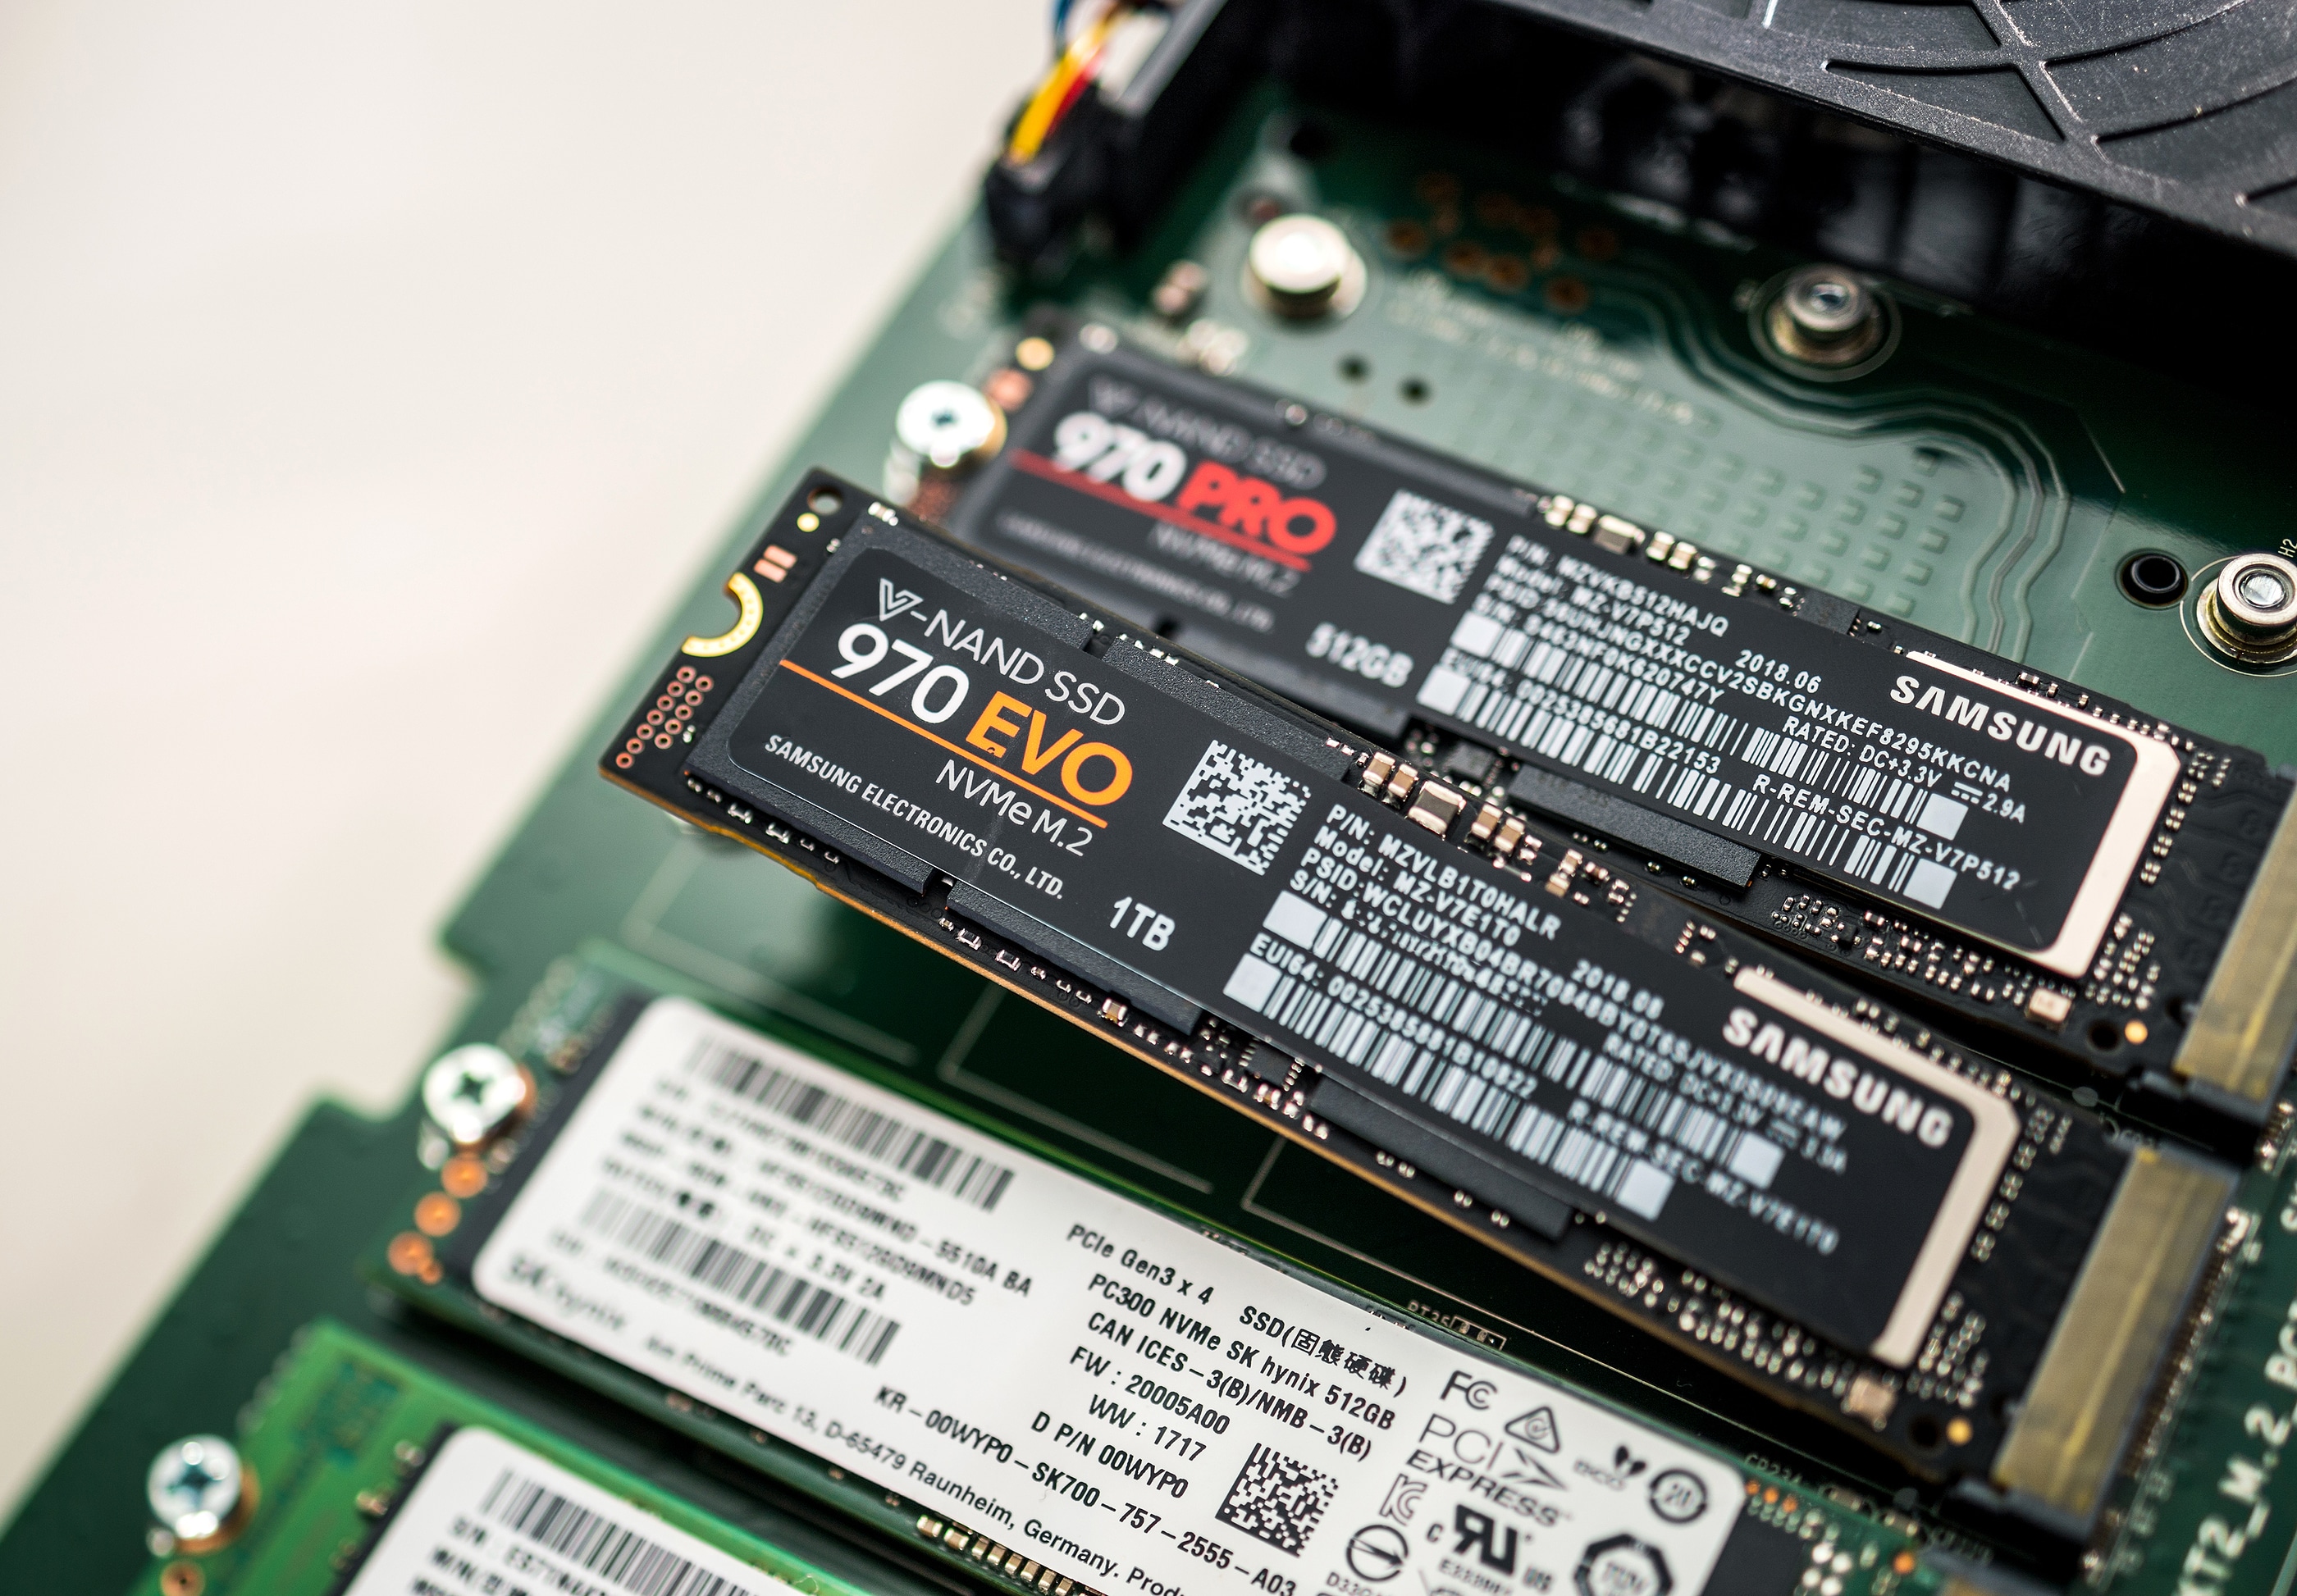 Vice nice to meet you Egomania The different types of SSDs